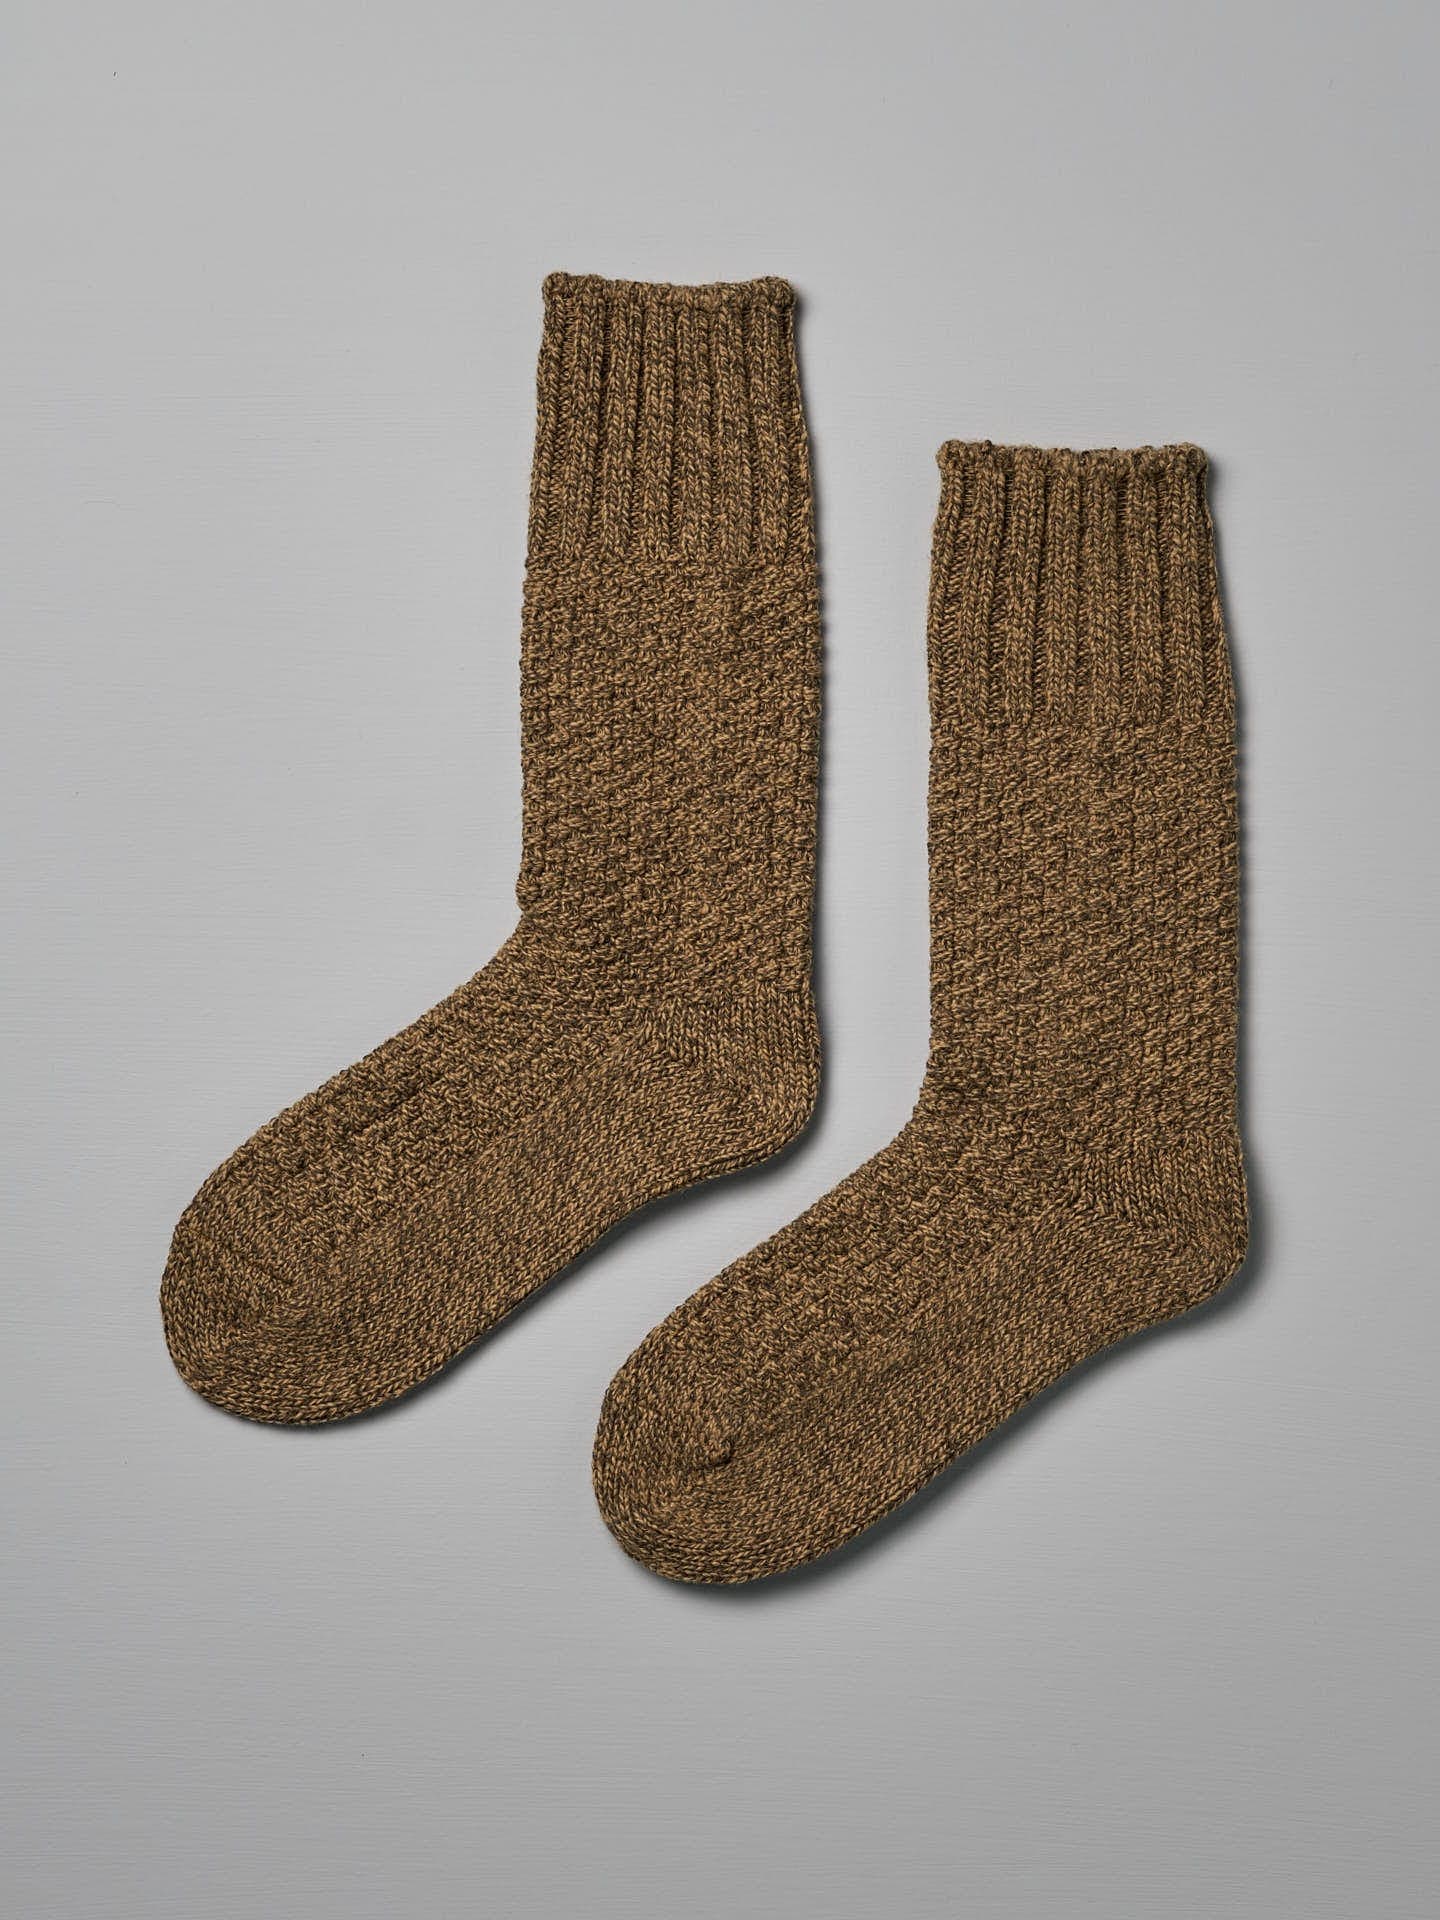 A pair of Wool Cotton Boot Socks – Mustard by Nishiguchi Kutsushita, suitable for both EUR shoe size and US men's shoe size, are laid flat on a light gray surface.